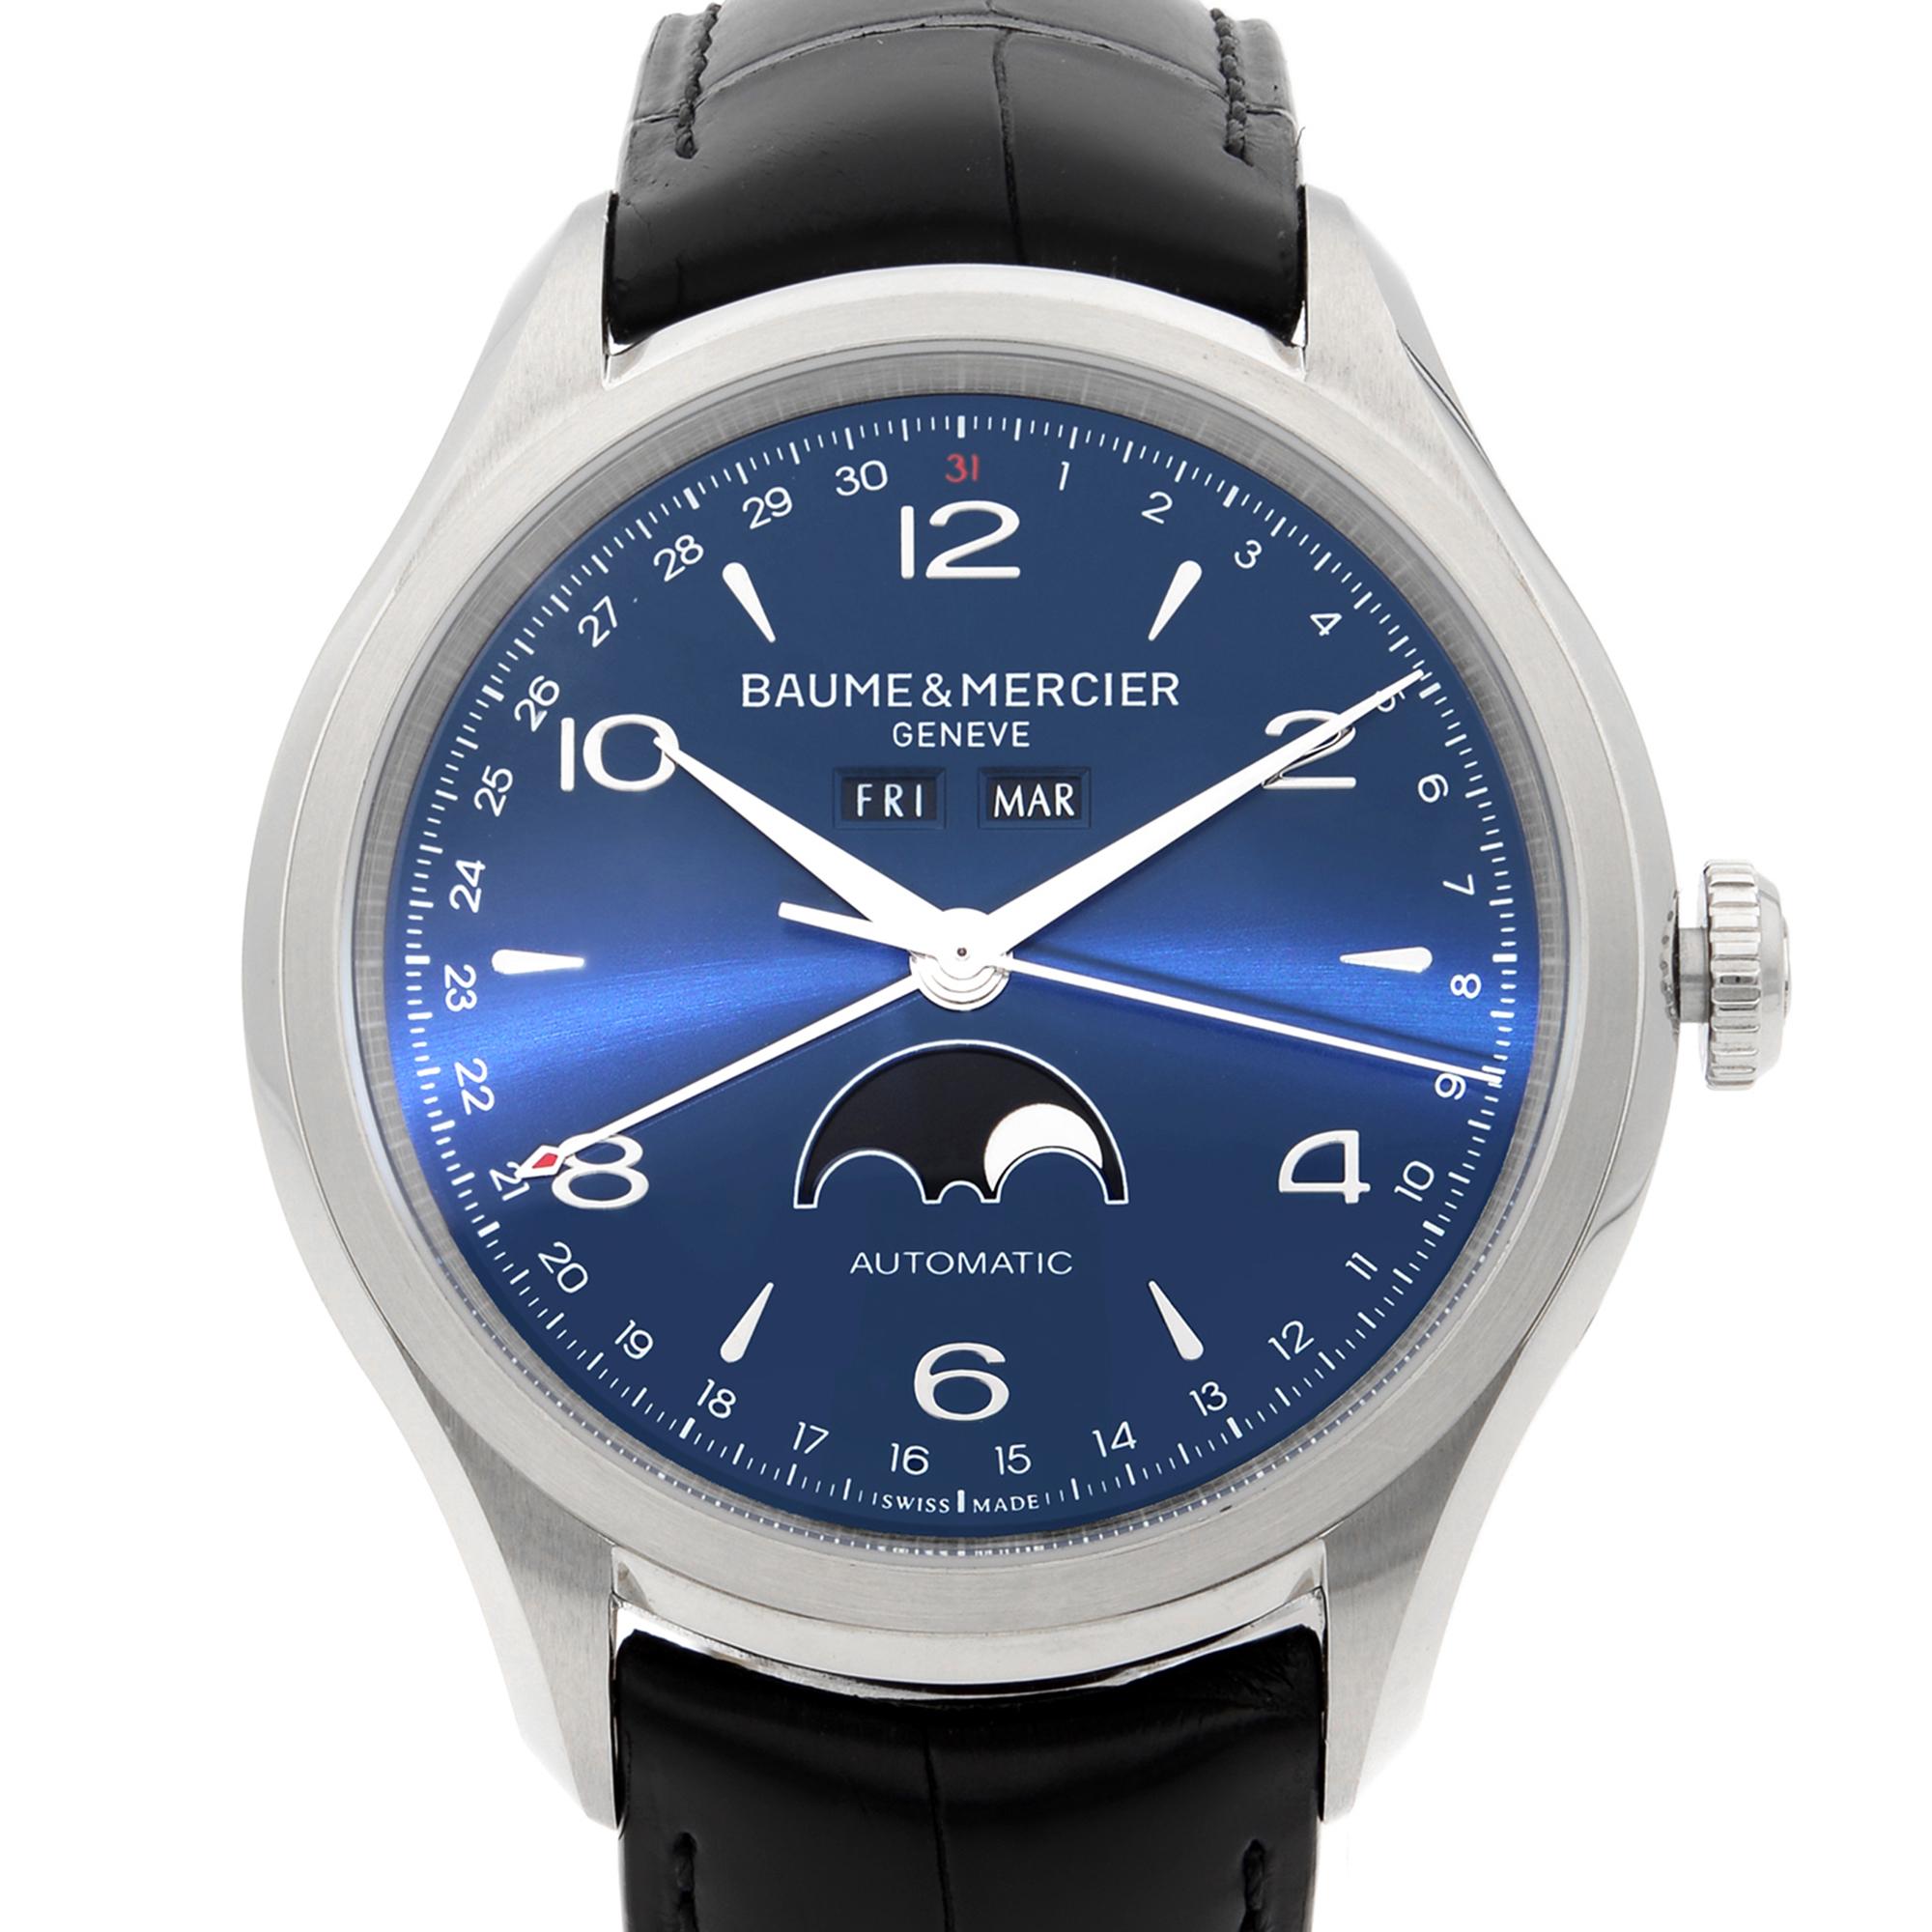 This display model Baume et Mercier Clifton MOA10057  is a beautiful men's timepiece that is powered by mechanical (automatic) movement which is cased in a stainless steel case. It has a round shape face, annual calendar, day & date, moon phase dial